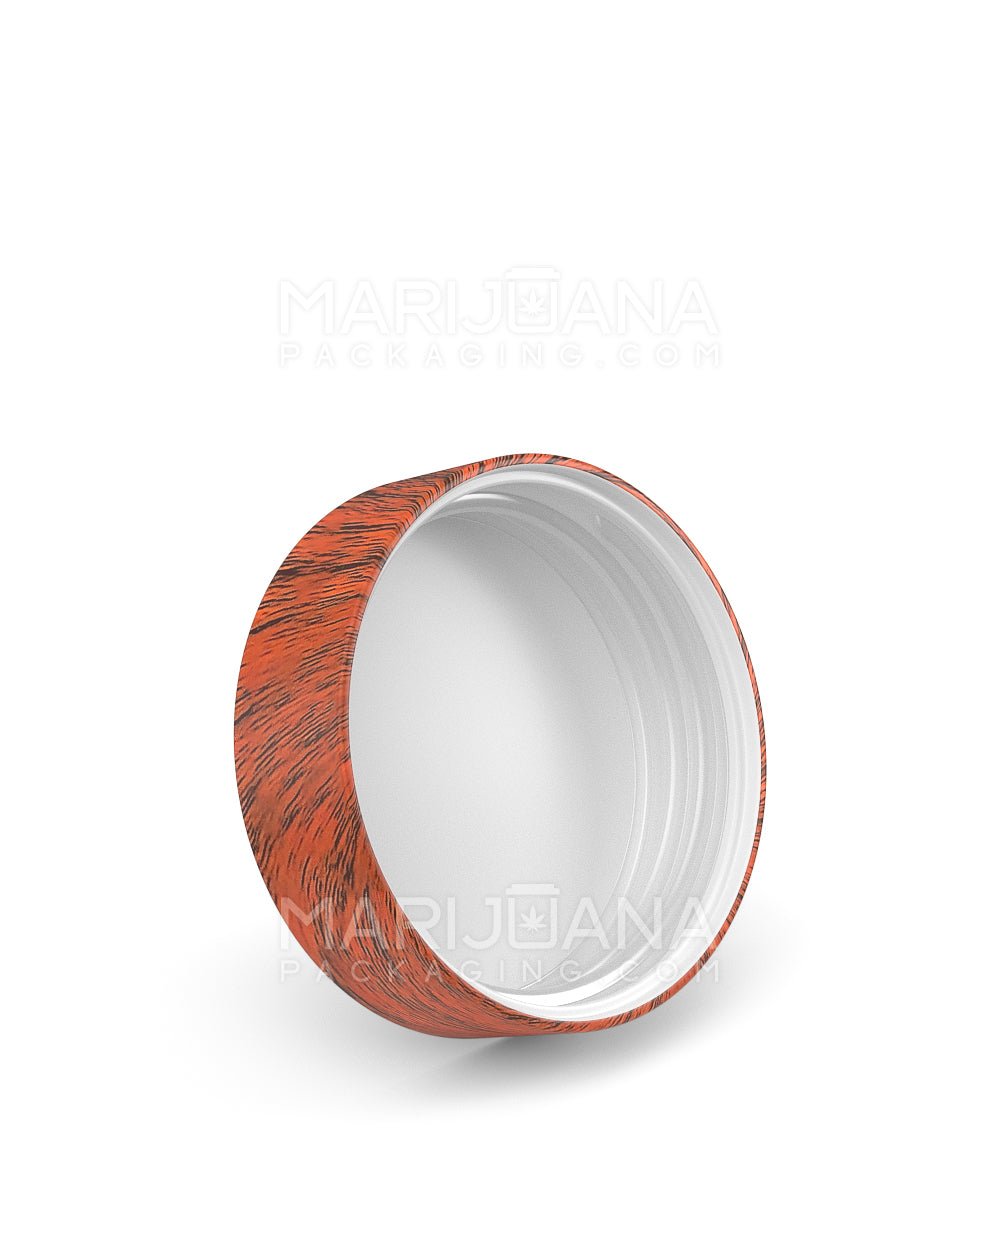 Child Resistant | Smooth Flat Push Down & Turn Plastic Caps w/ Foam Liner | 53mm - Red Wood - 100 Count - 2